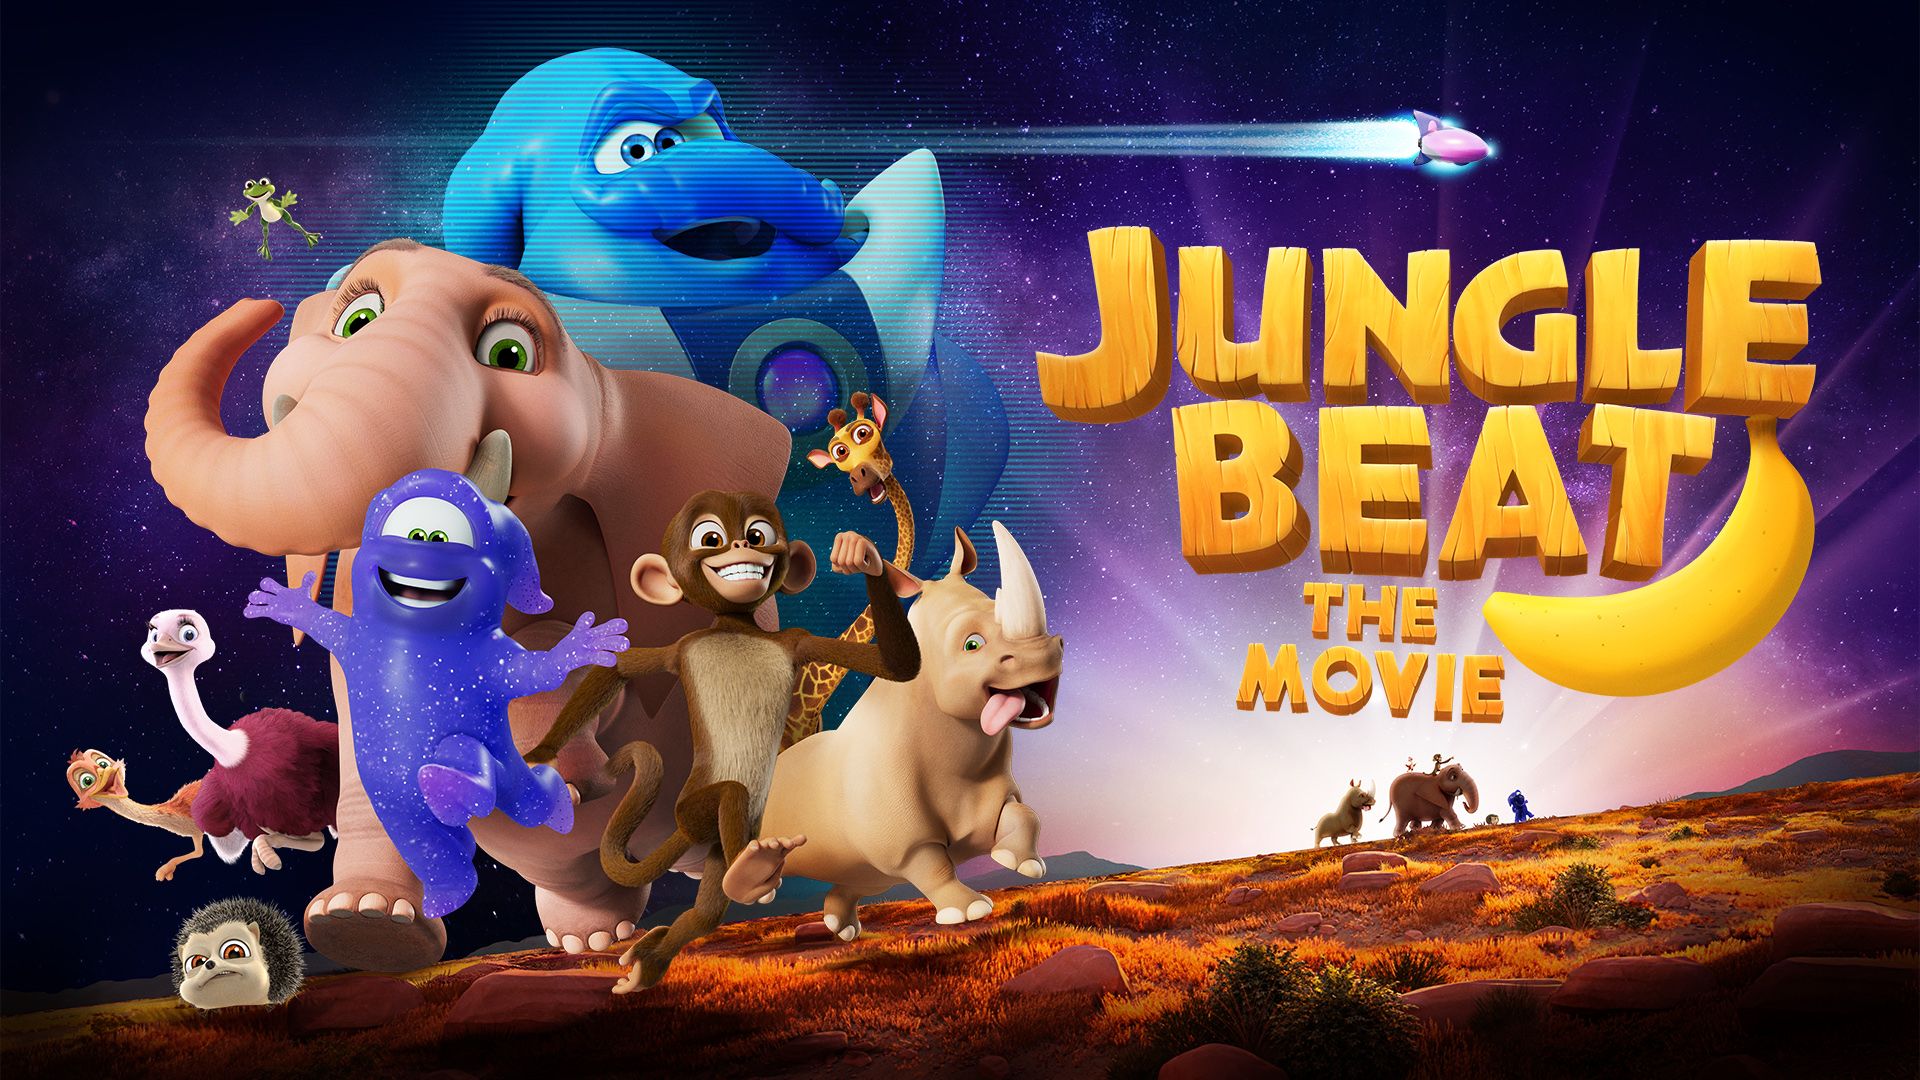 Jungle Beat The Movie Activity Playbook the Magnificent. Download movies, Movies, Animation movies download